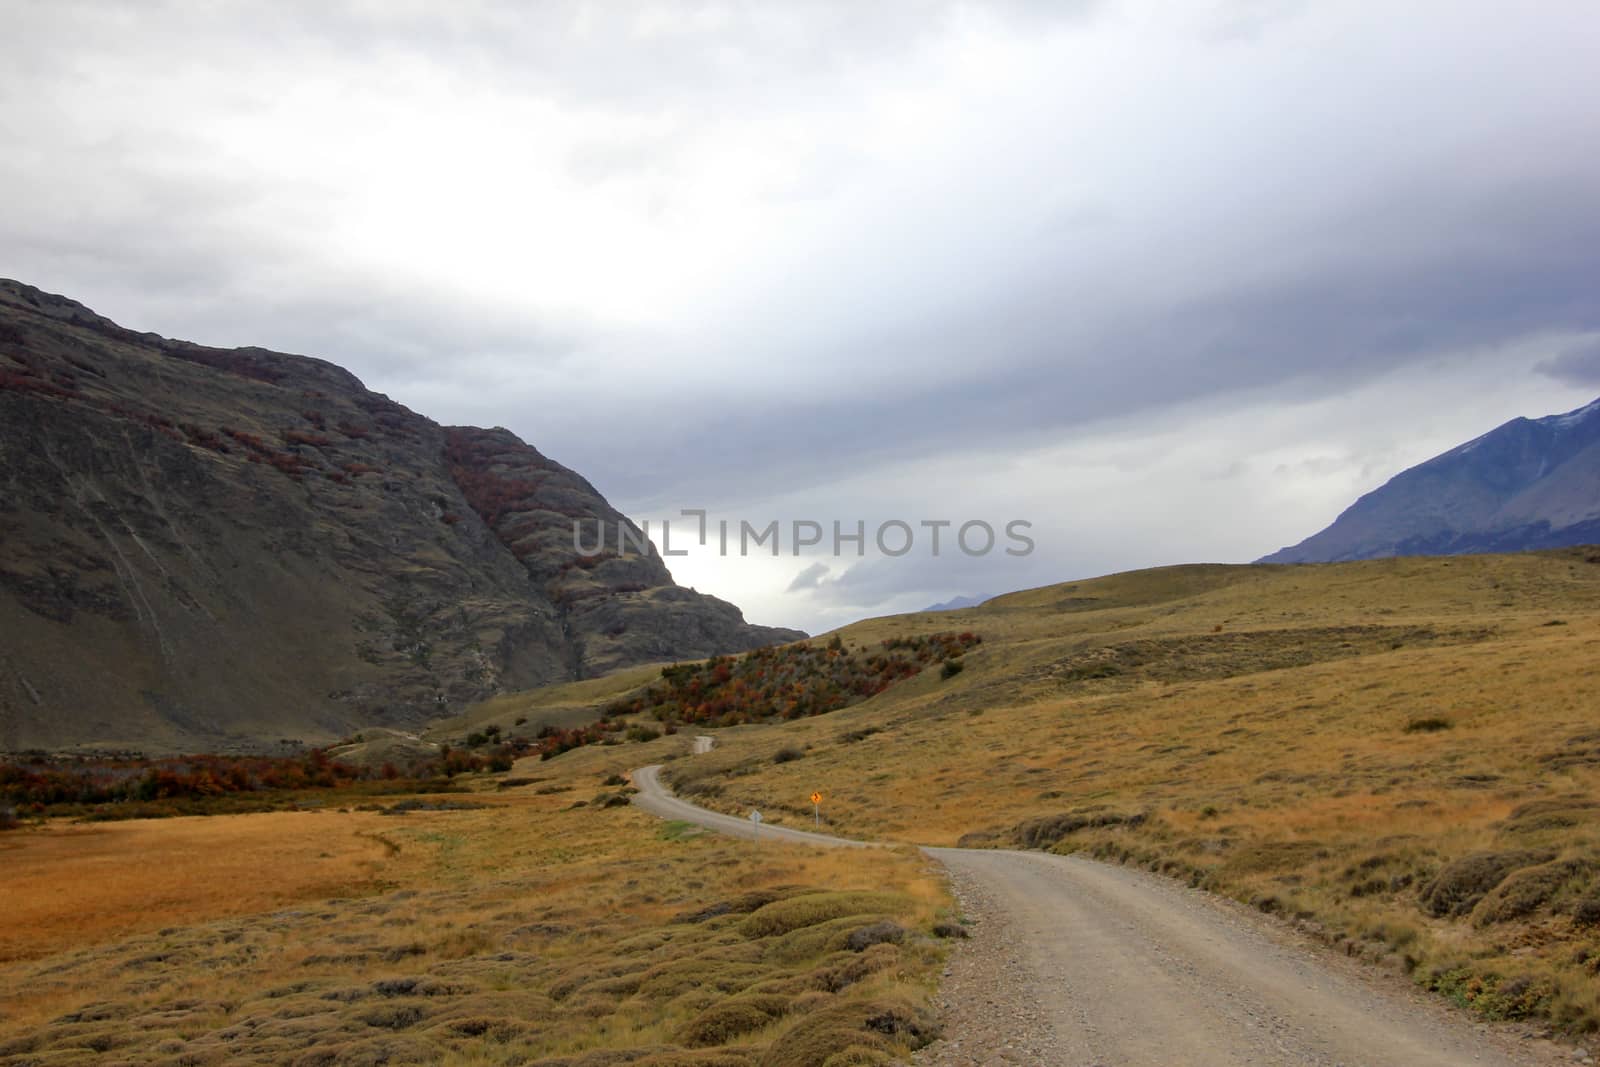 Beautiful landscape near Paso Roballos, Argentina and Chile by cicloco